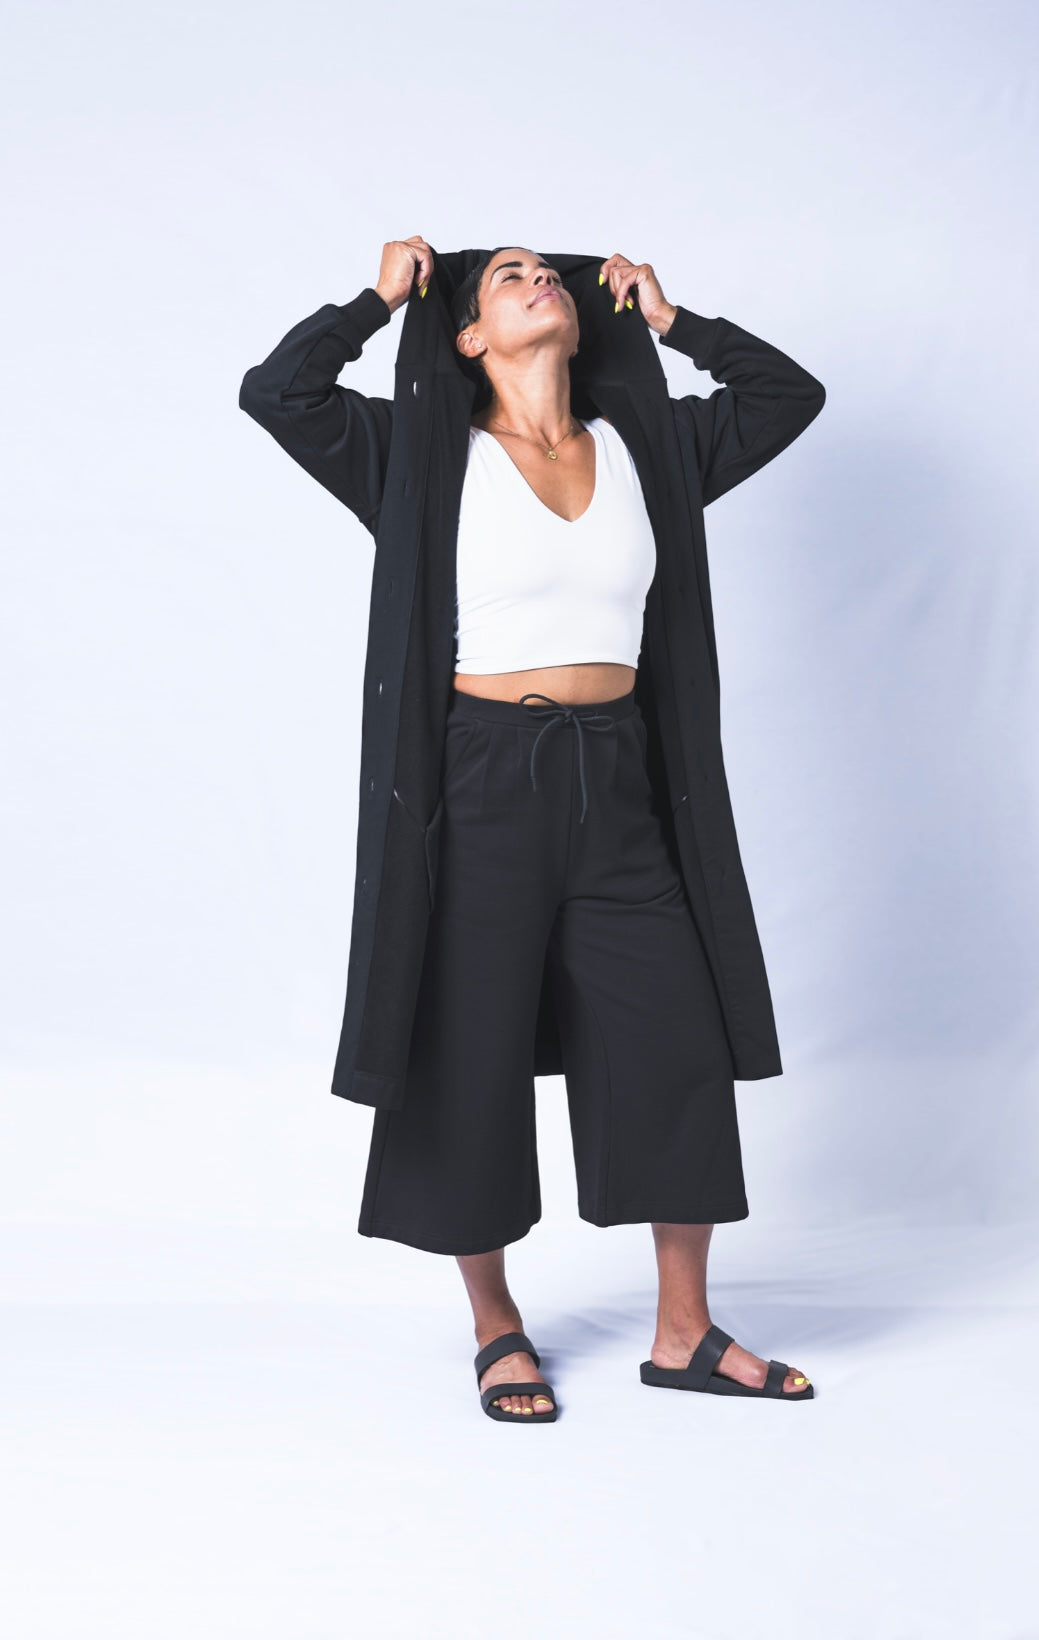 Somewhere between a cardigan and a coat...Its a Coatigan! Hand-picked black cotton poly blend fabric ensures lasting comfort no matter how many times you wash it. Features oversized hood for extra comfort. Sizes Small-Large available.